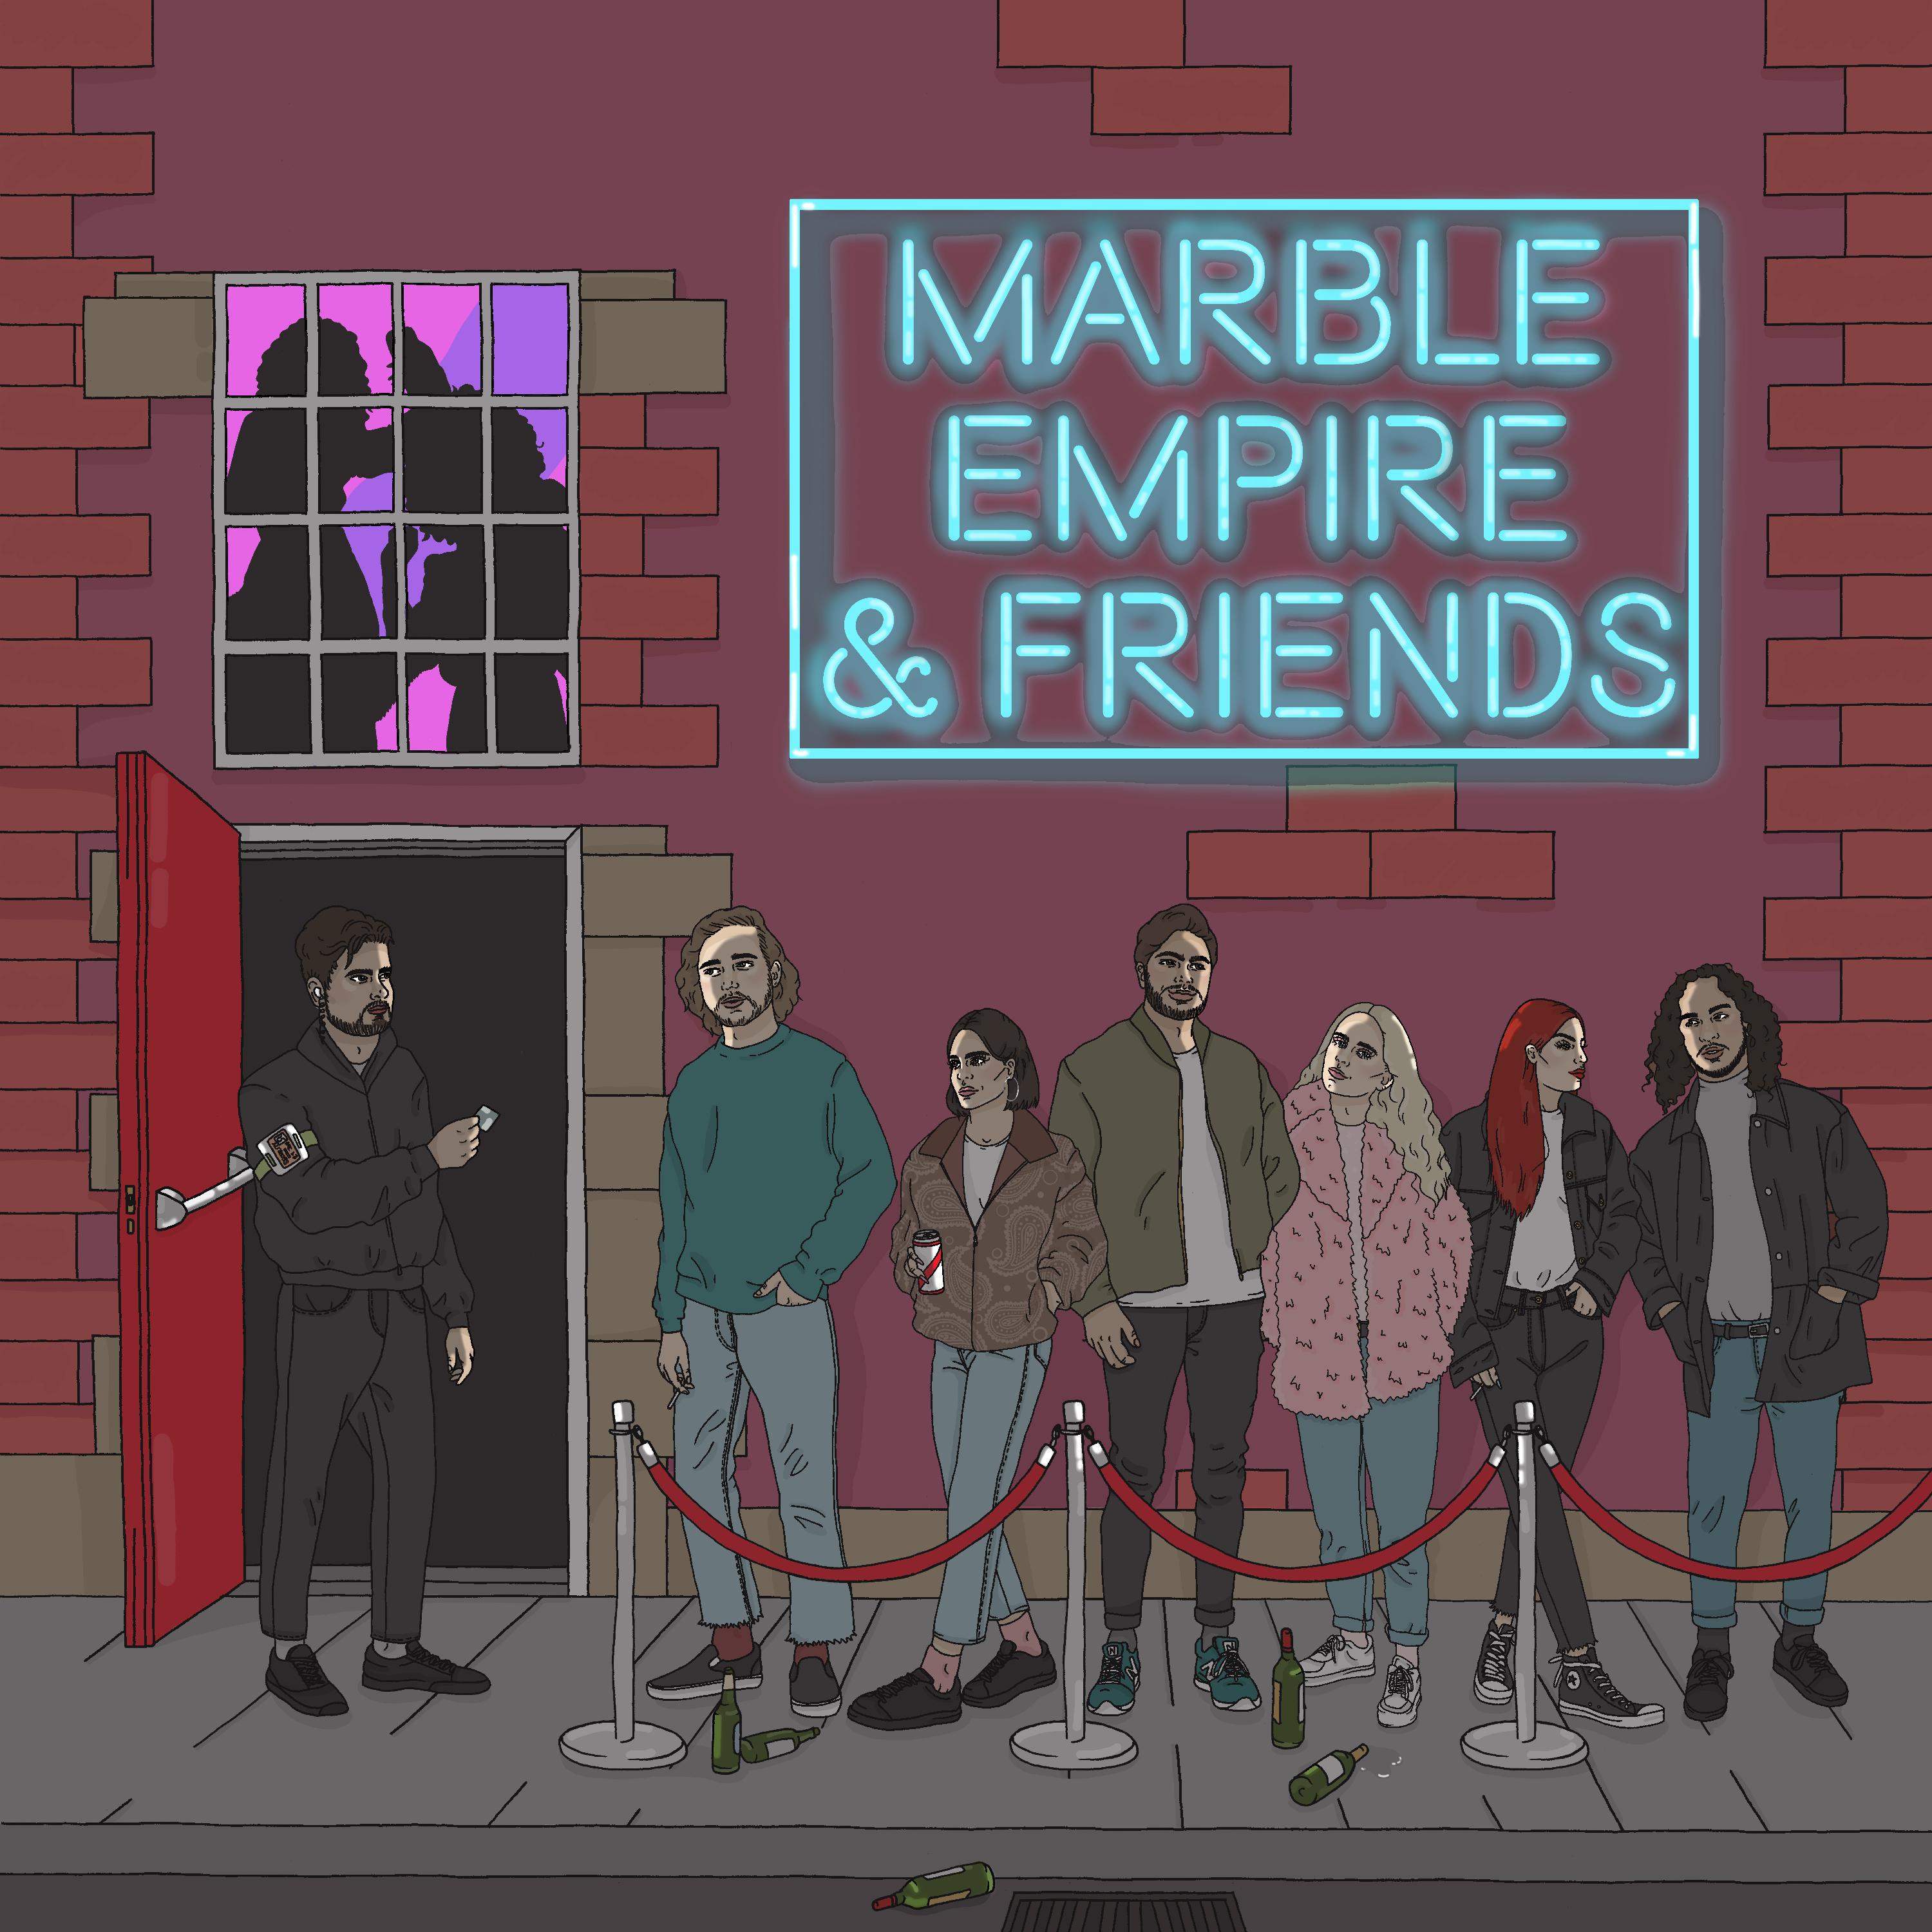 Marble Empire & Friends